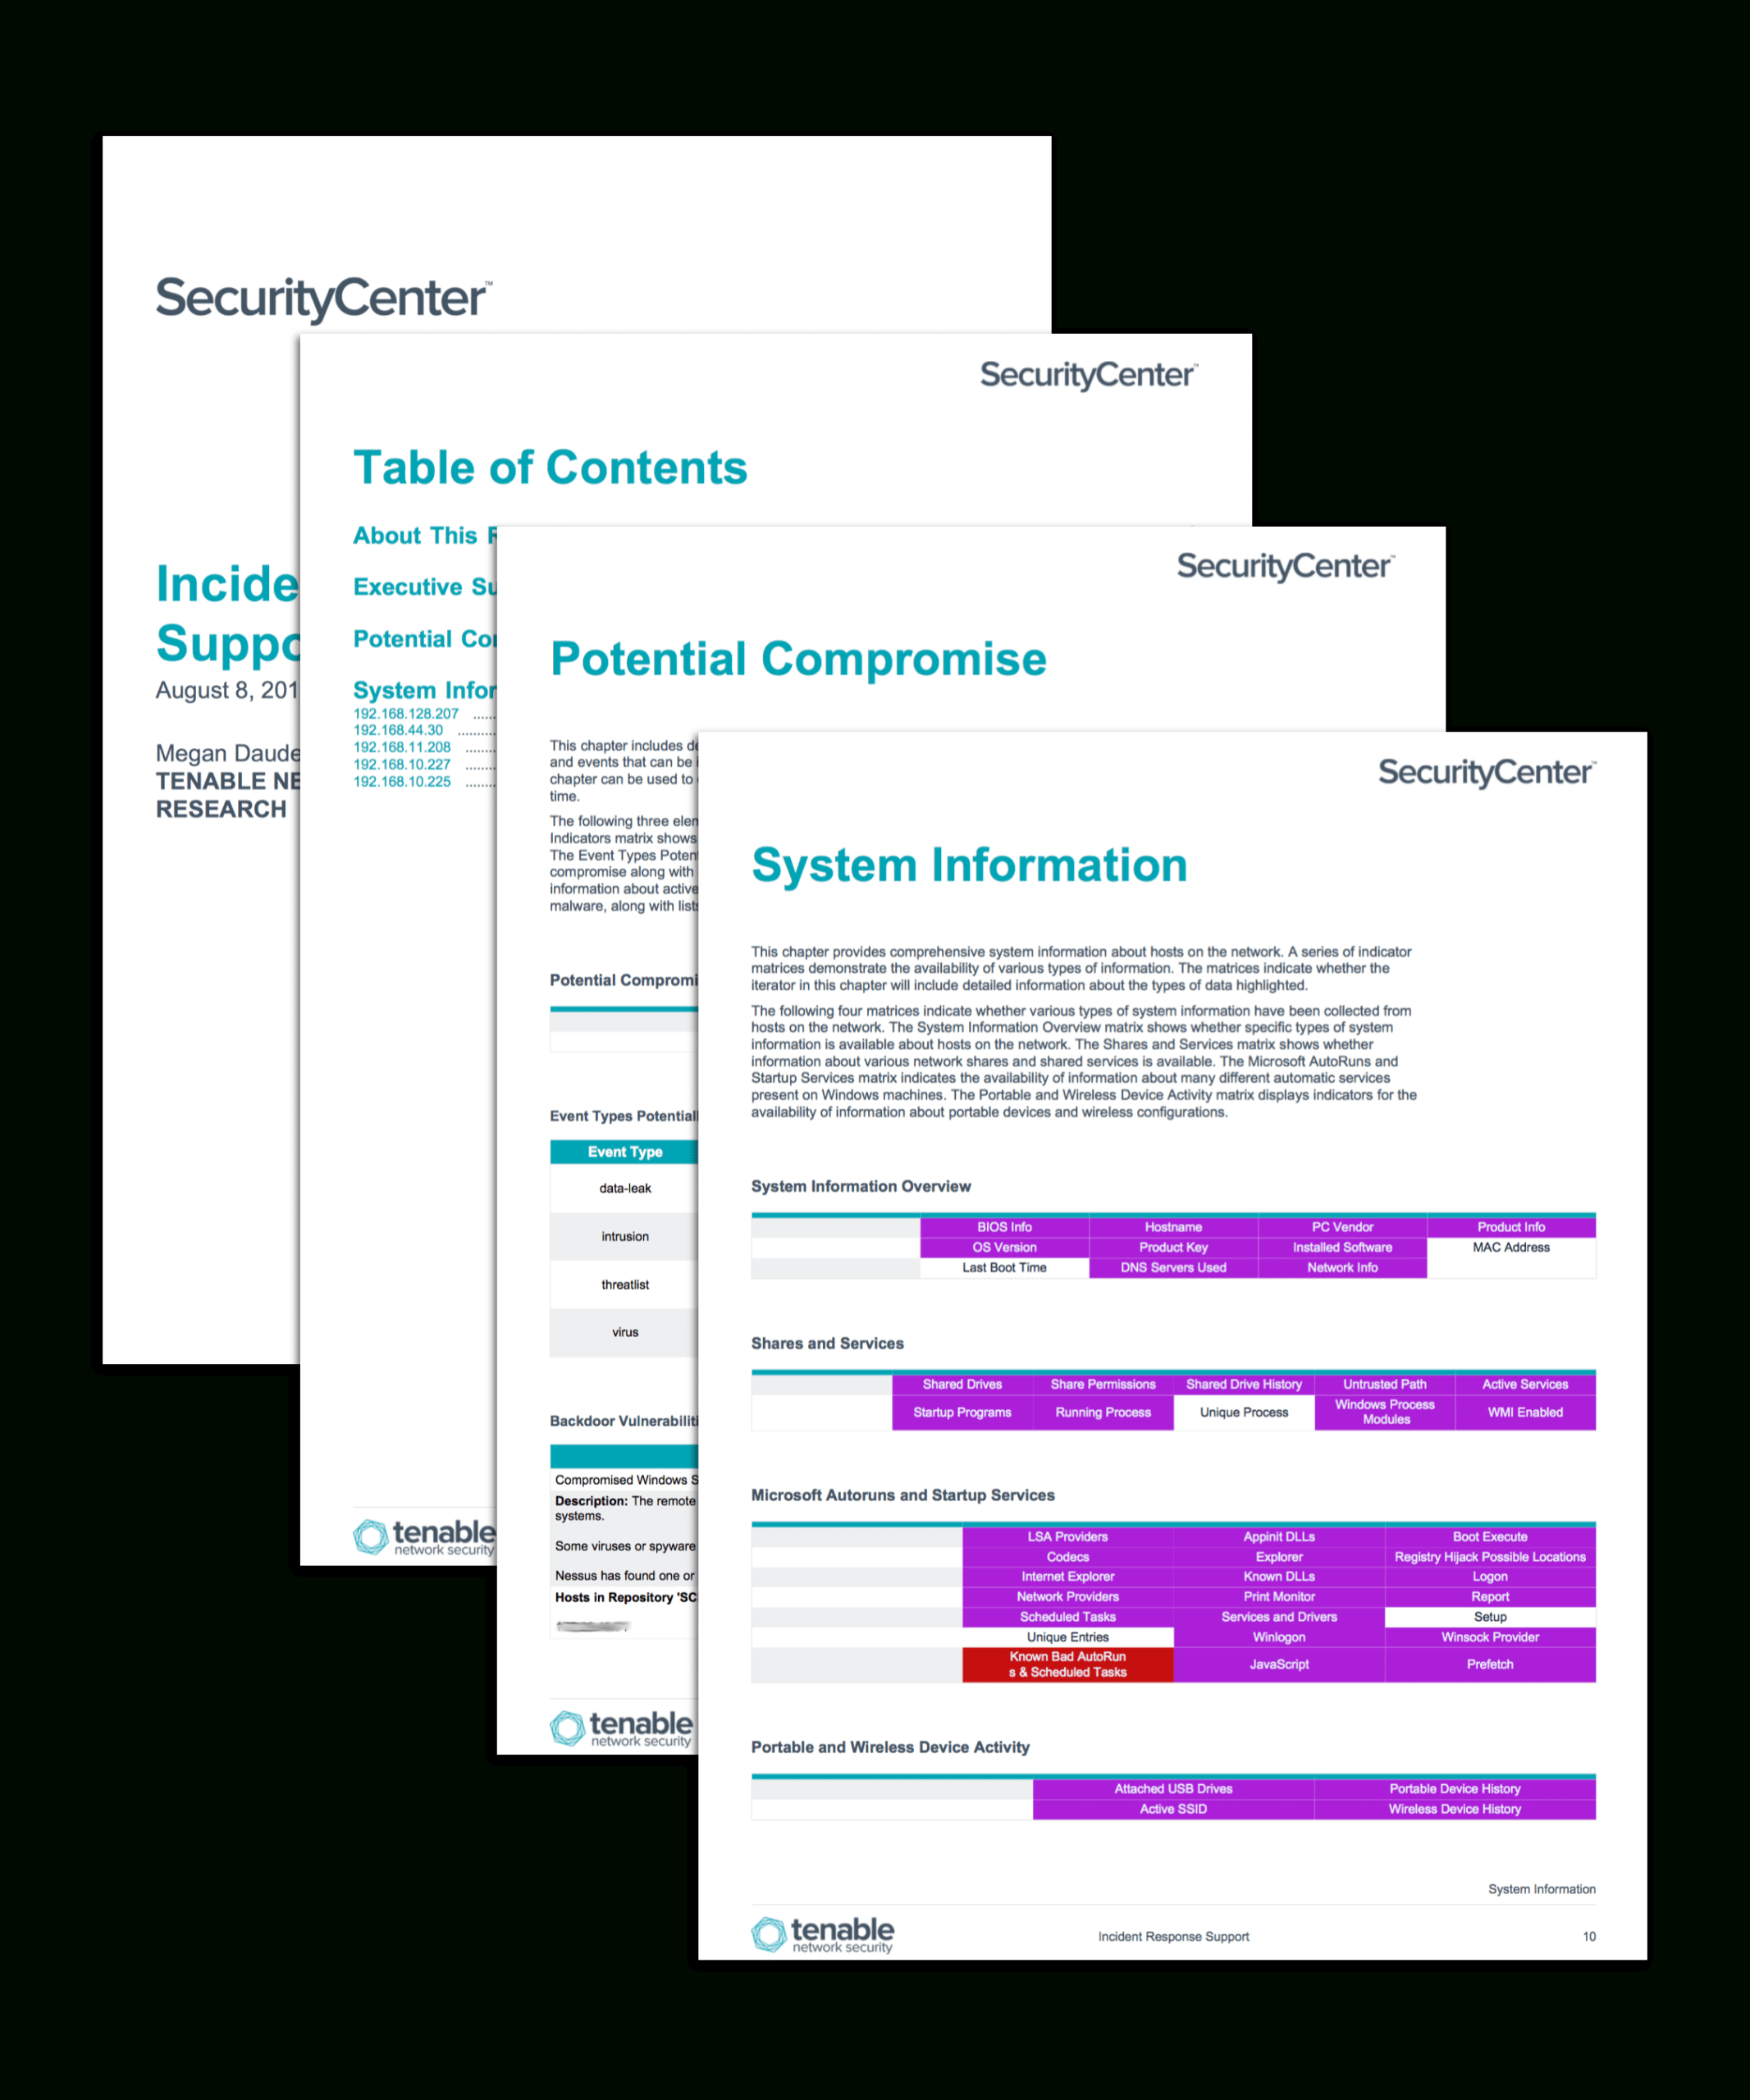 Incident Response Support - Sc Report Template | Tenable® With Regard To Technical Support Report Template